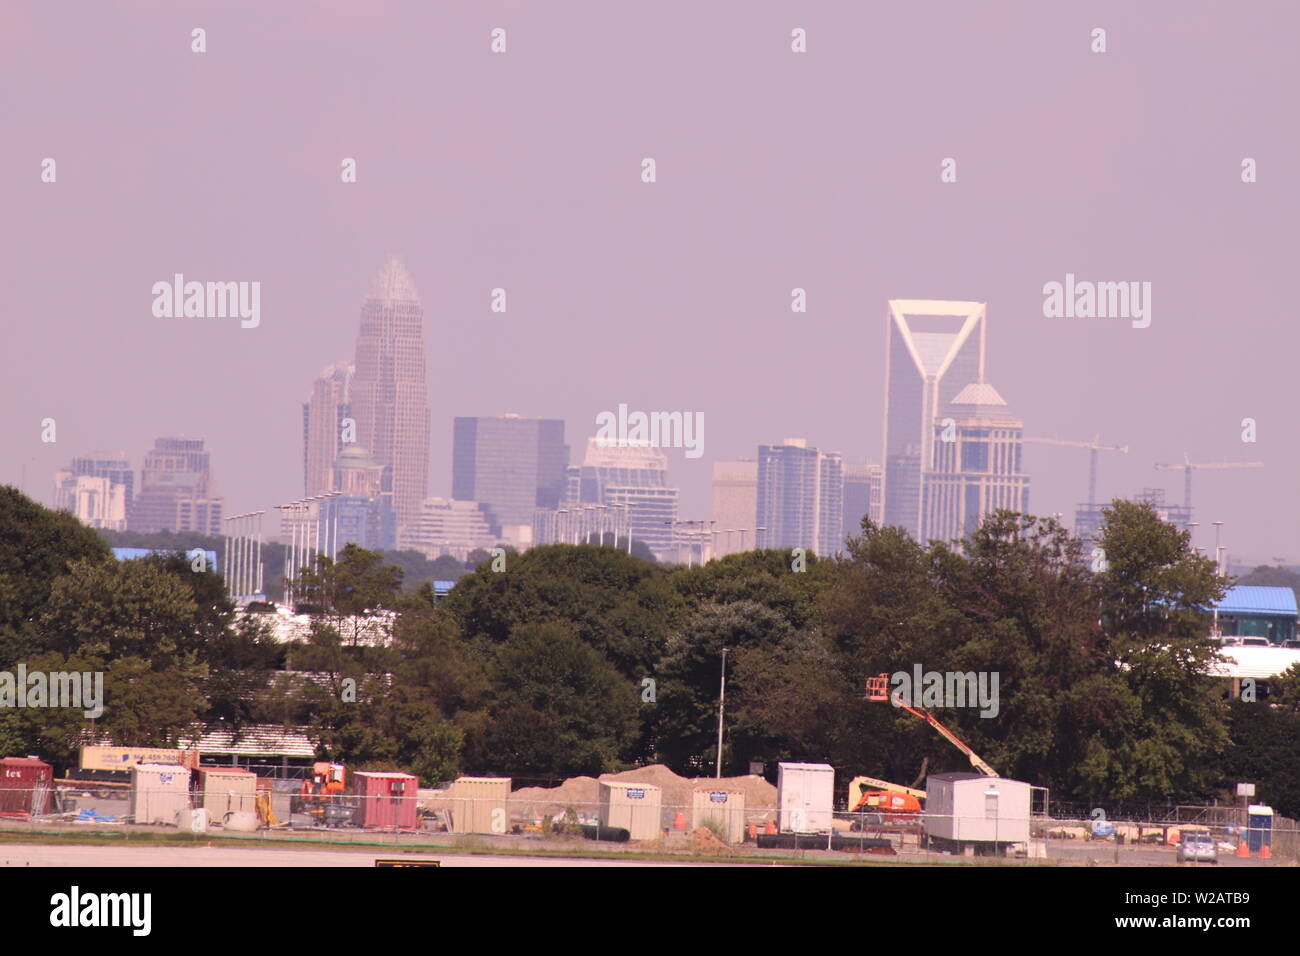 Uptown Charlotte, NC from CLT airport. Stock Photo